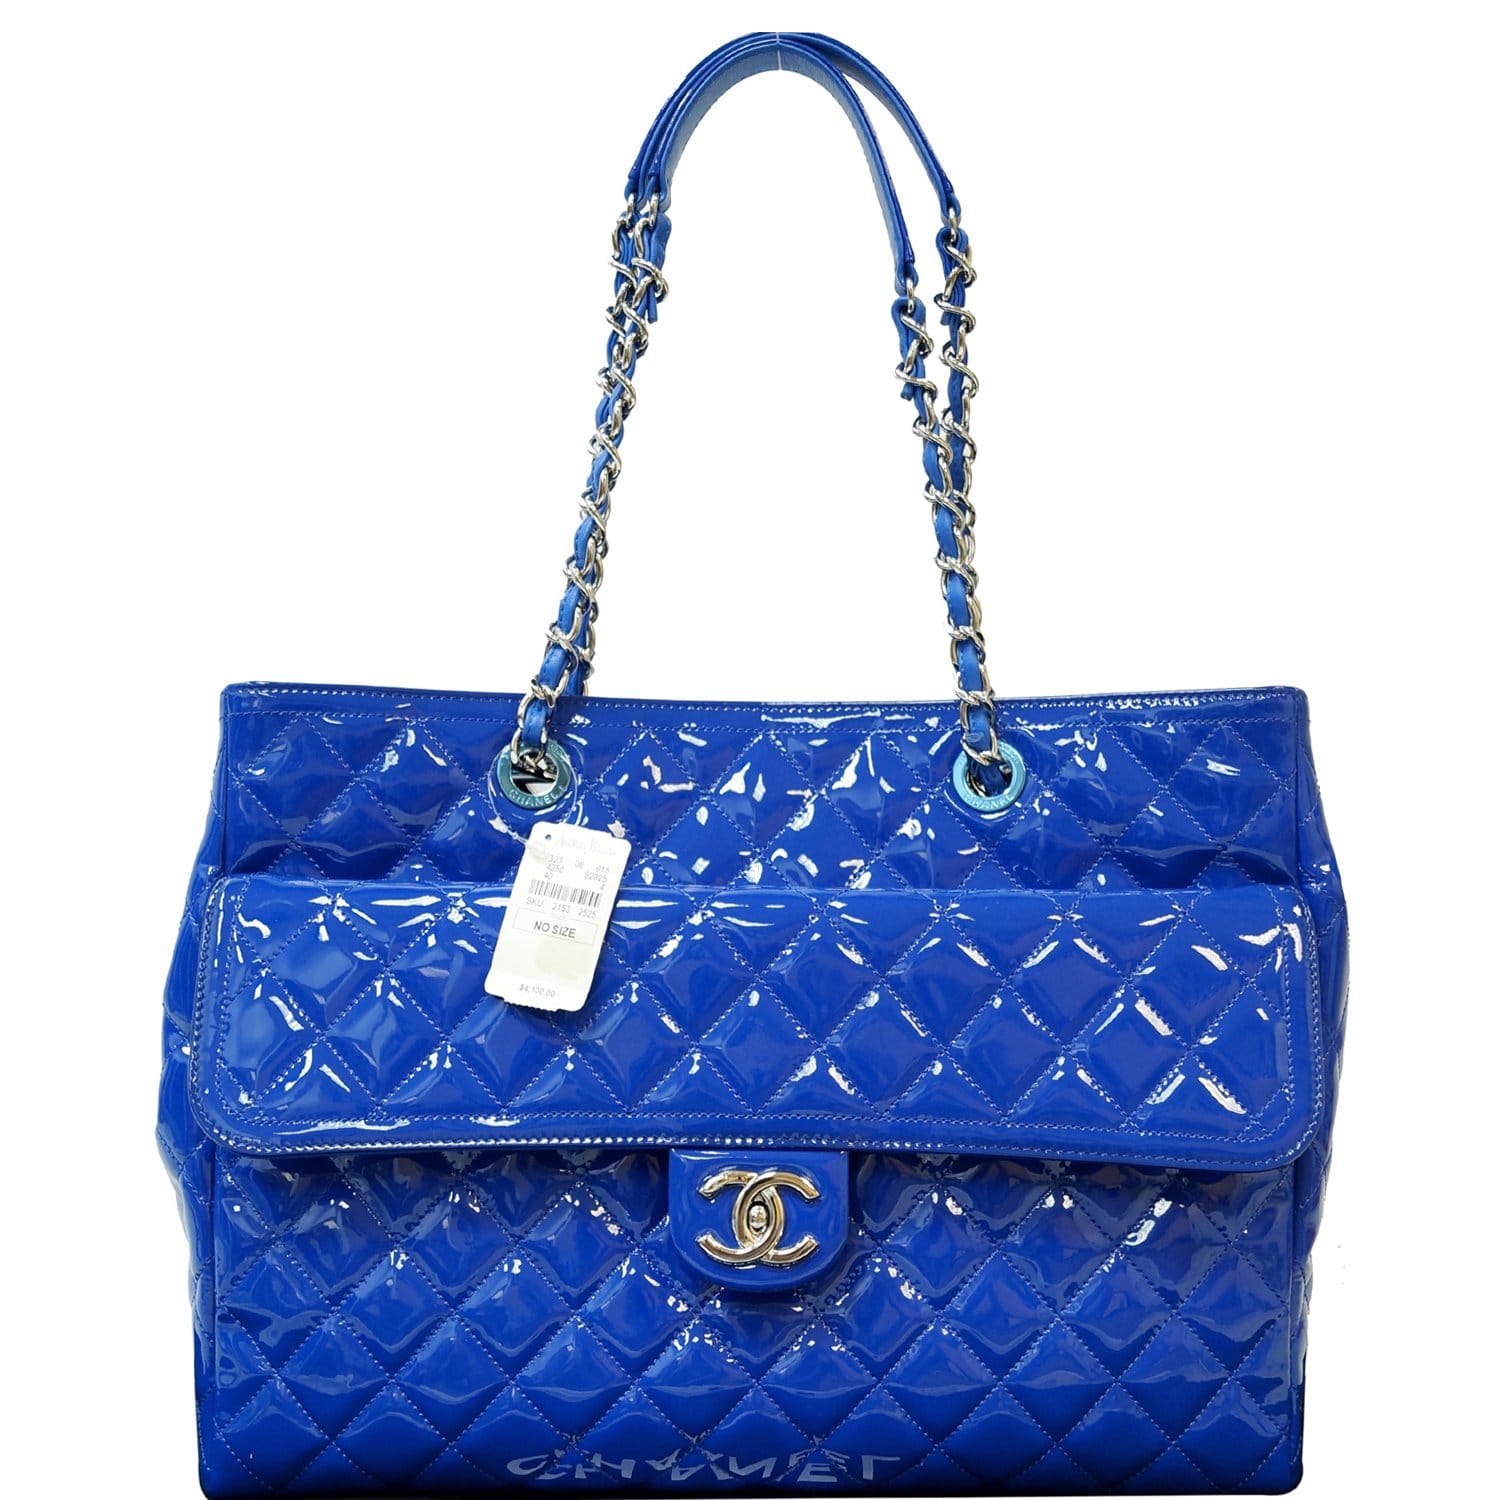 Used Blue Chanel Blue Leather Coco Cabas Shoulder Bag Tote with Cosmetic Bag  Houston,TX